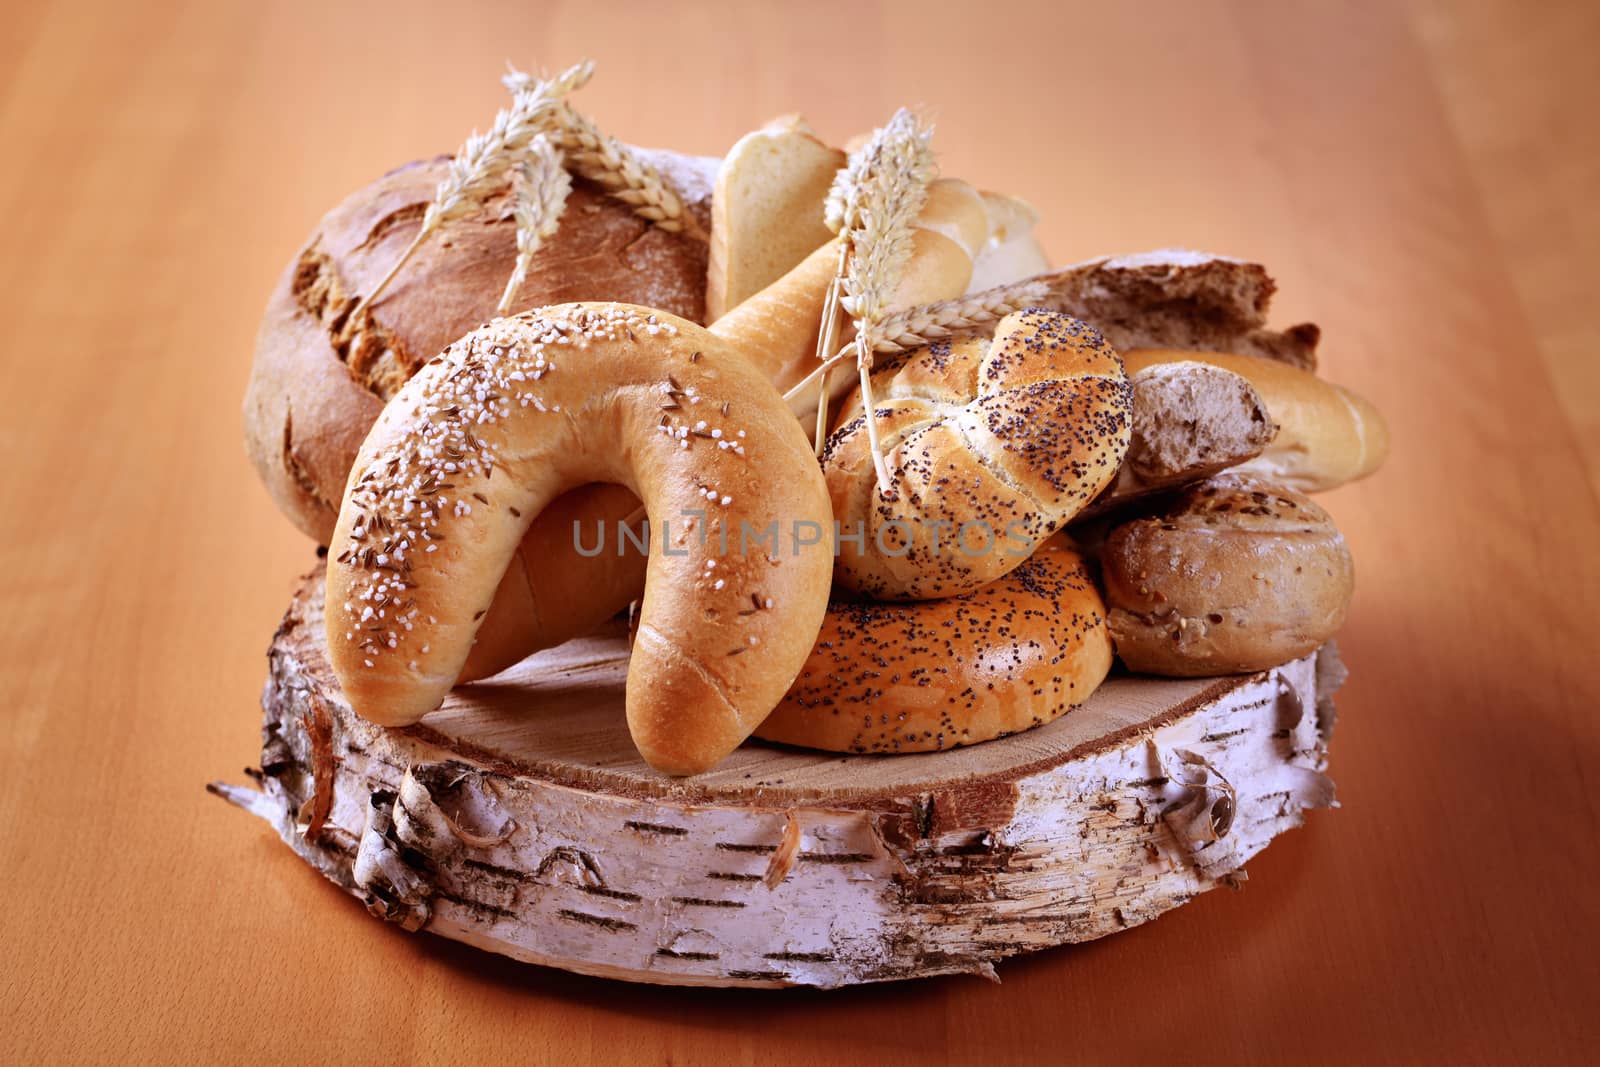 Variety of fresh bread and rolls by Digifoodstock